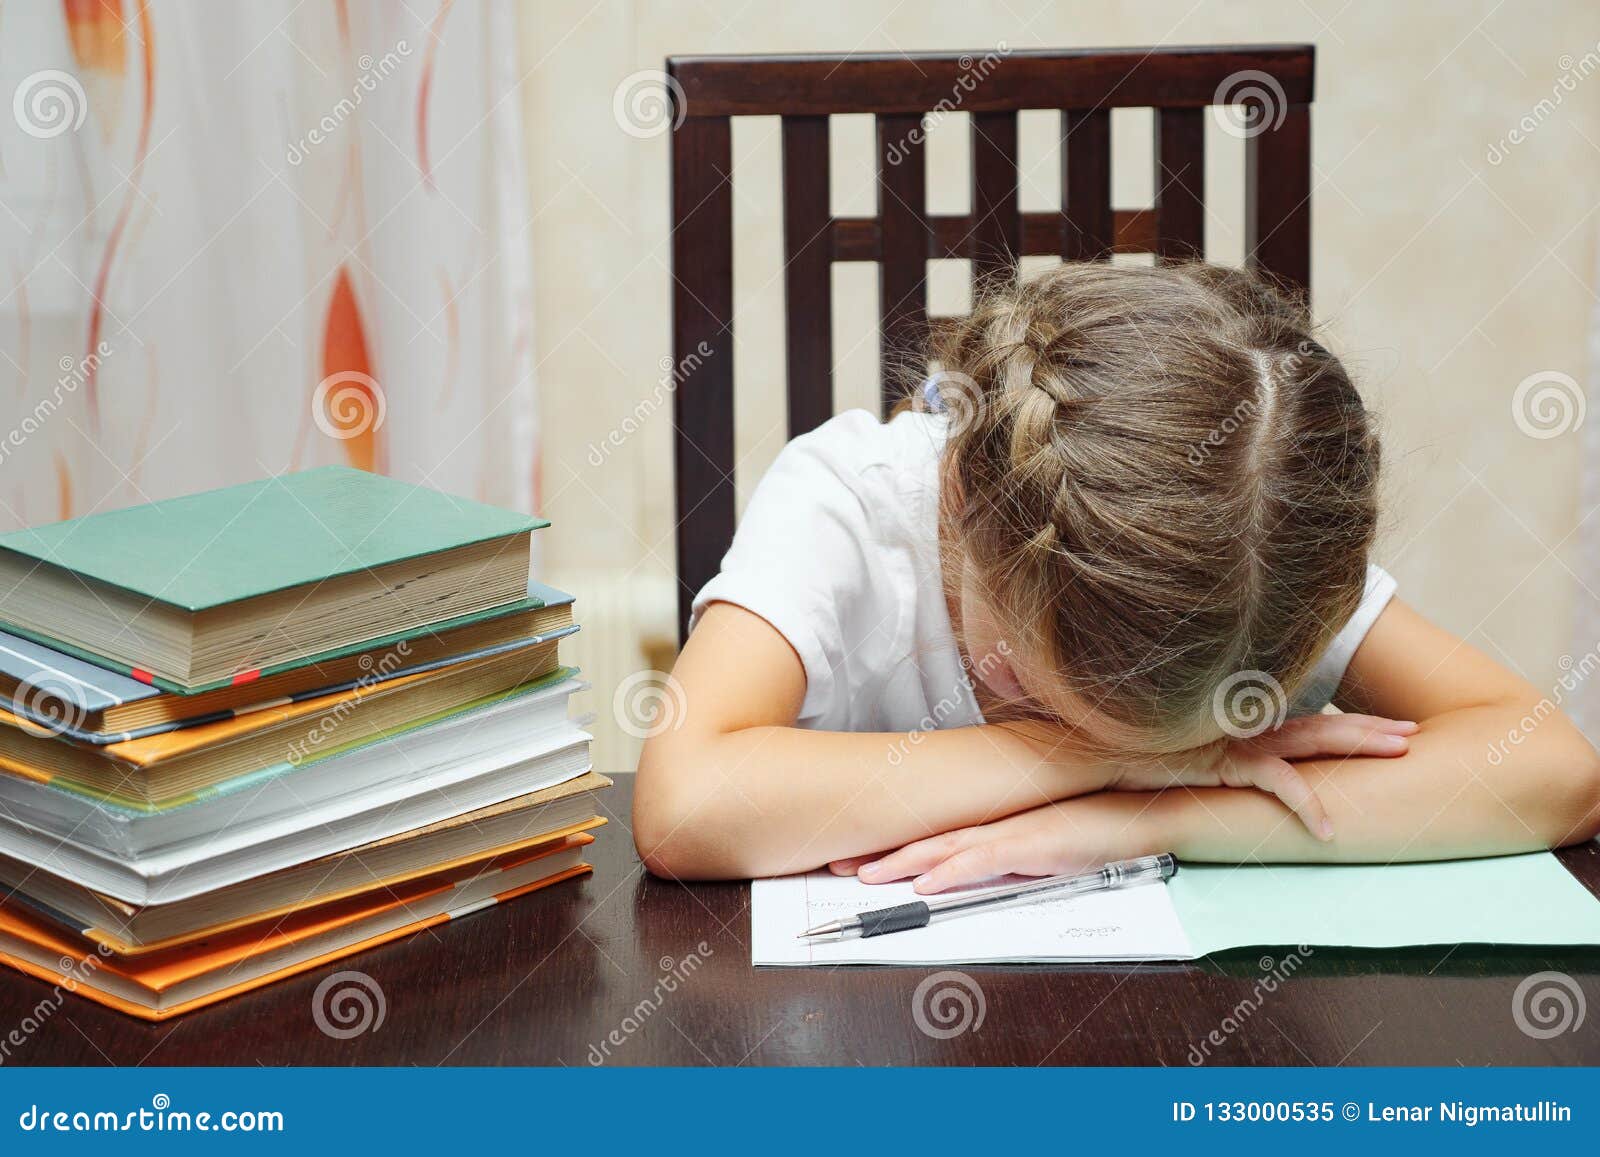 Little girl with textbooks studying asleep at the table